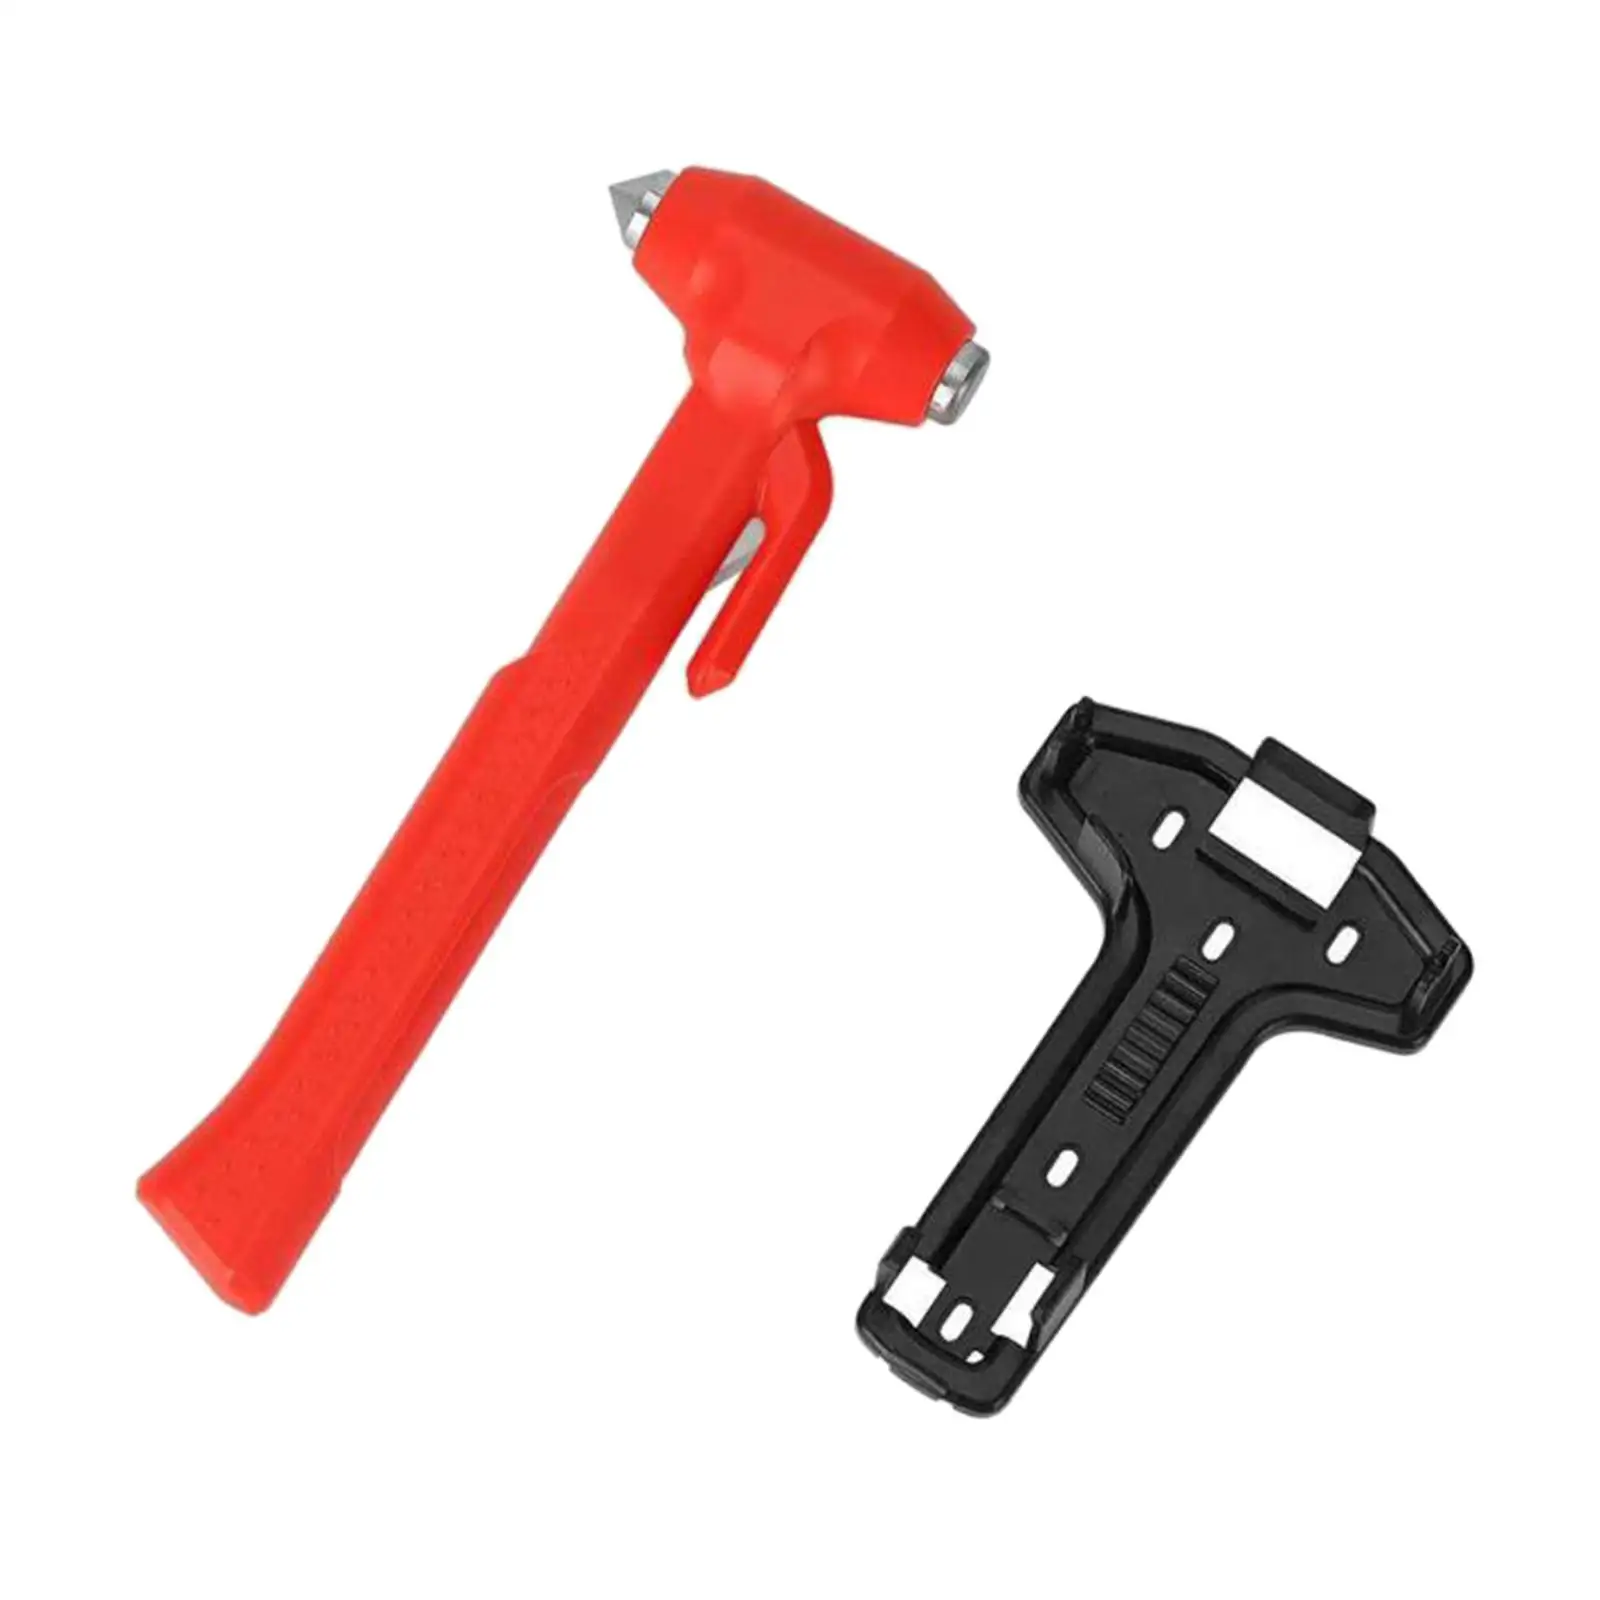 Car Safety Hammer Tool Multifunctional with Bracket Assist Accessories Seat Belt Cutter for Card Vehicles Bus Trucks Red